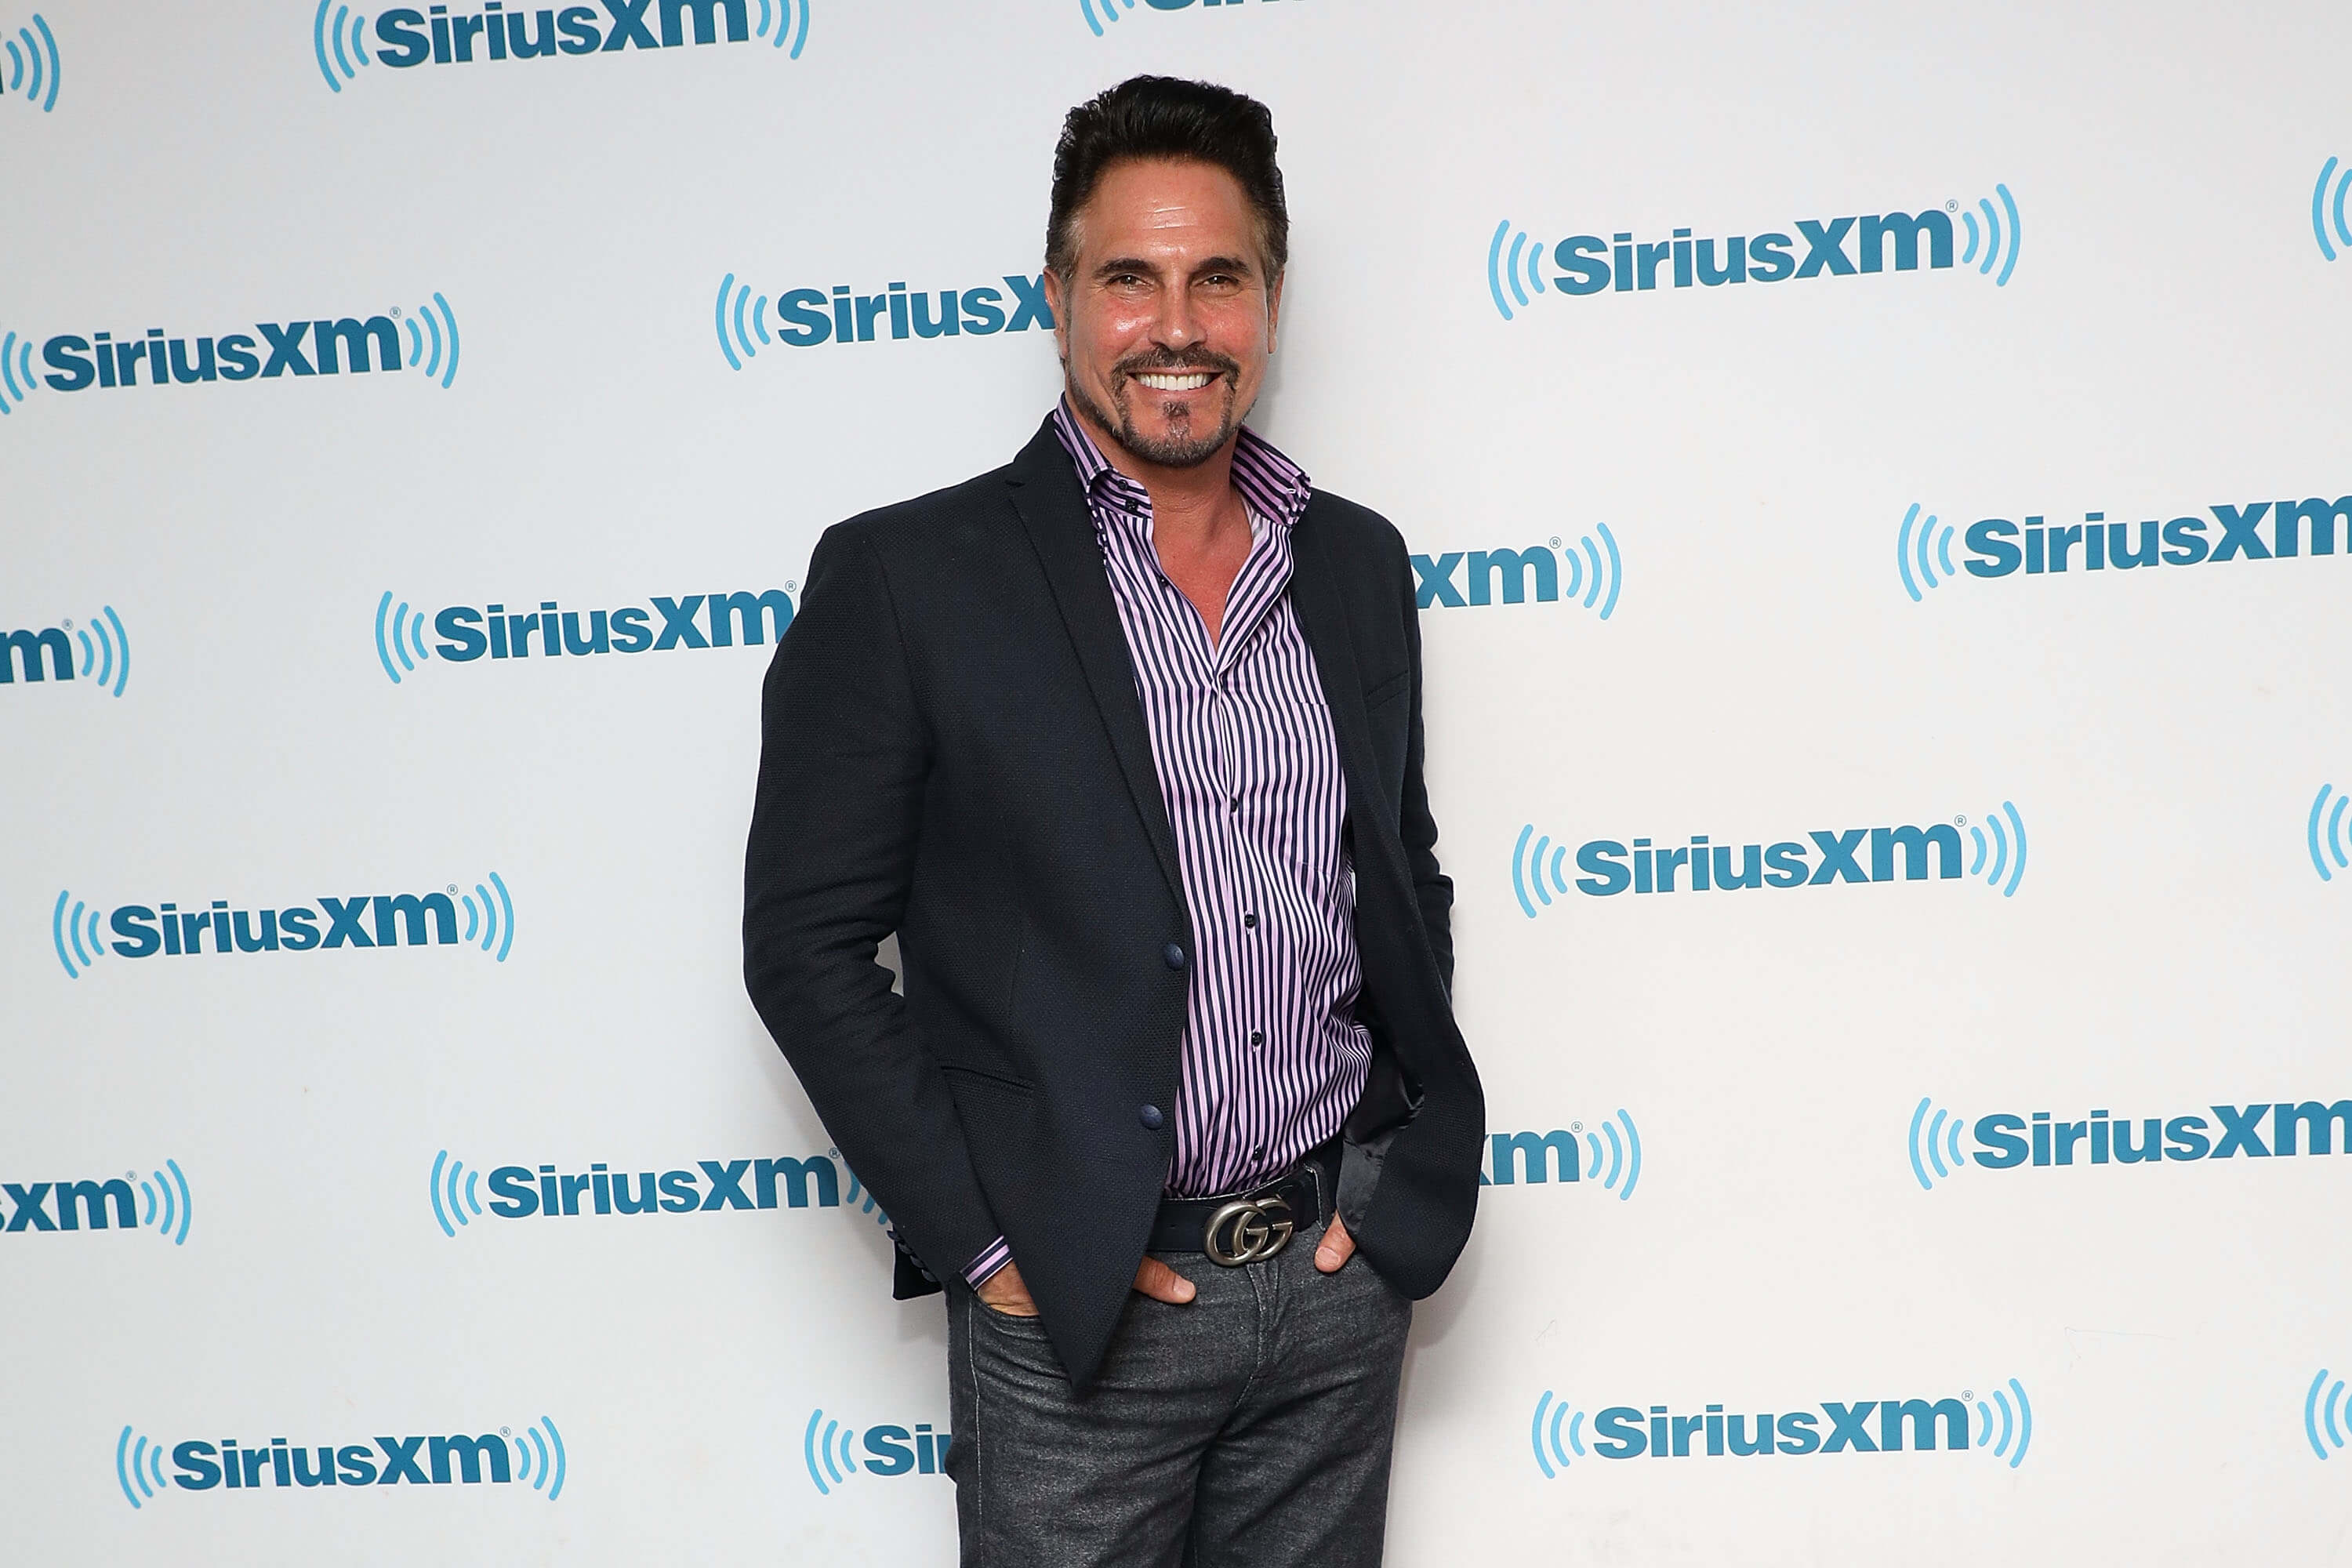 'The Bold and the Beautiful' star Don Diamont dressed in jeans, striped shirt, and jacket; poses on the red carpet.